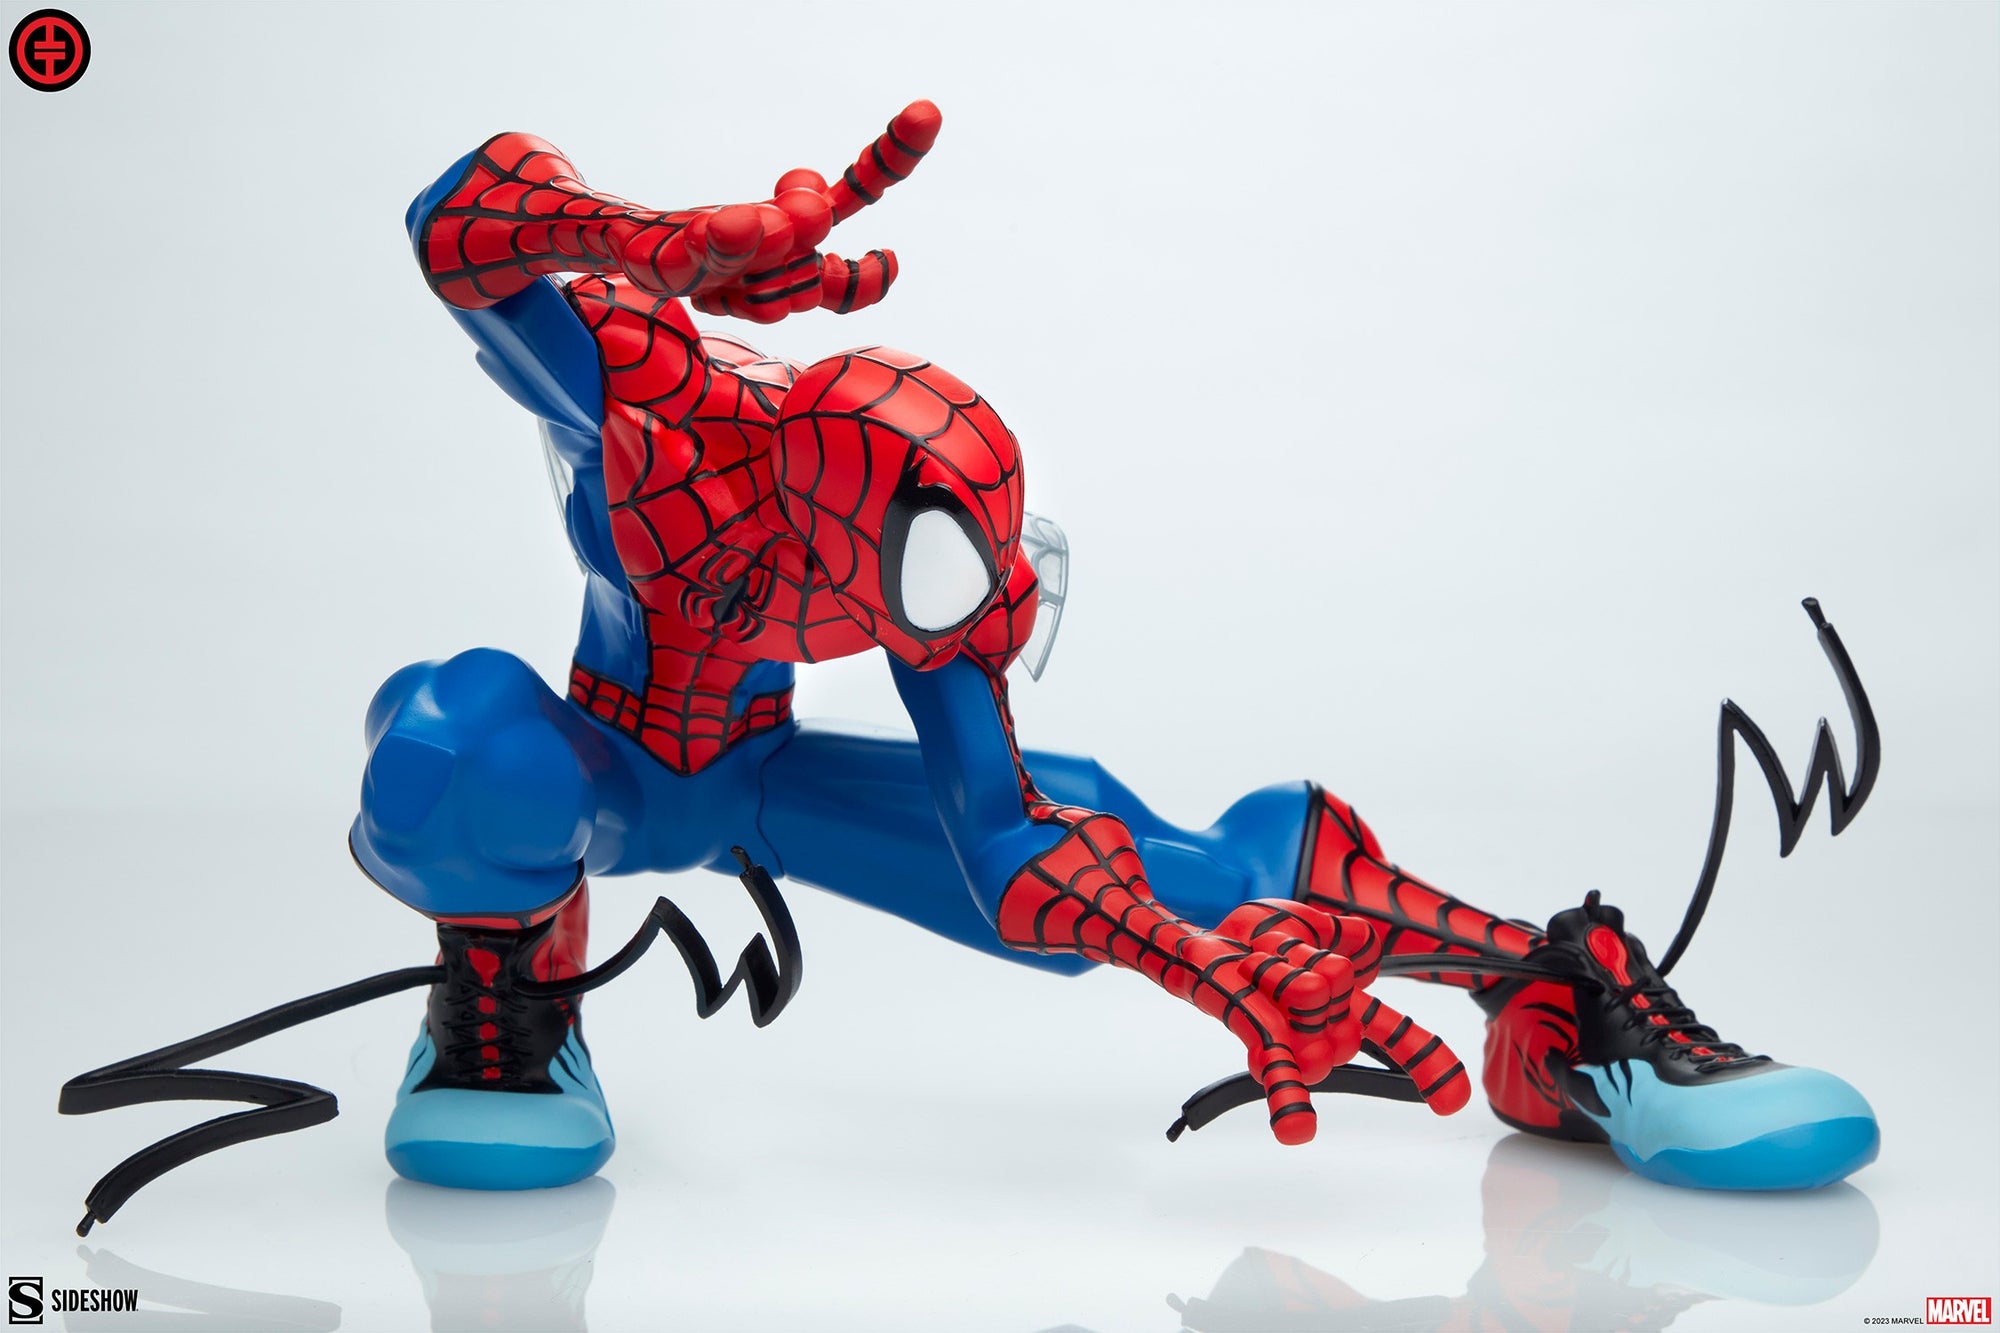 Spiderman Marvel Designer Collectible Statue by Tracy Tubera x Unruly Industries